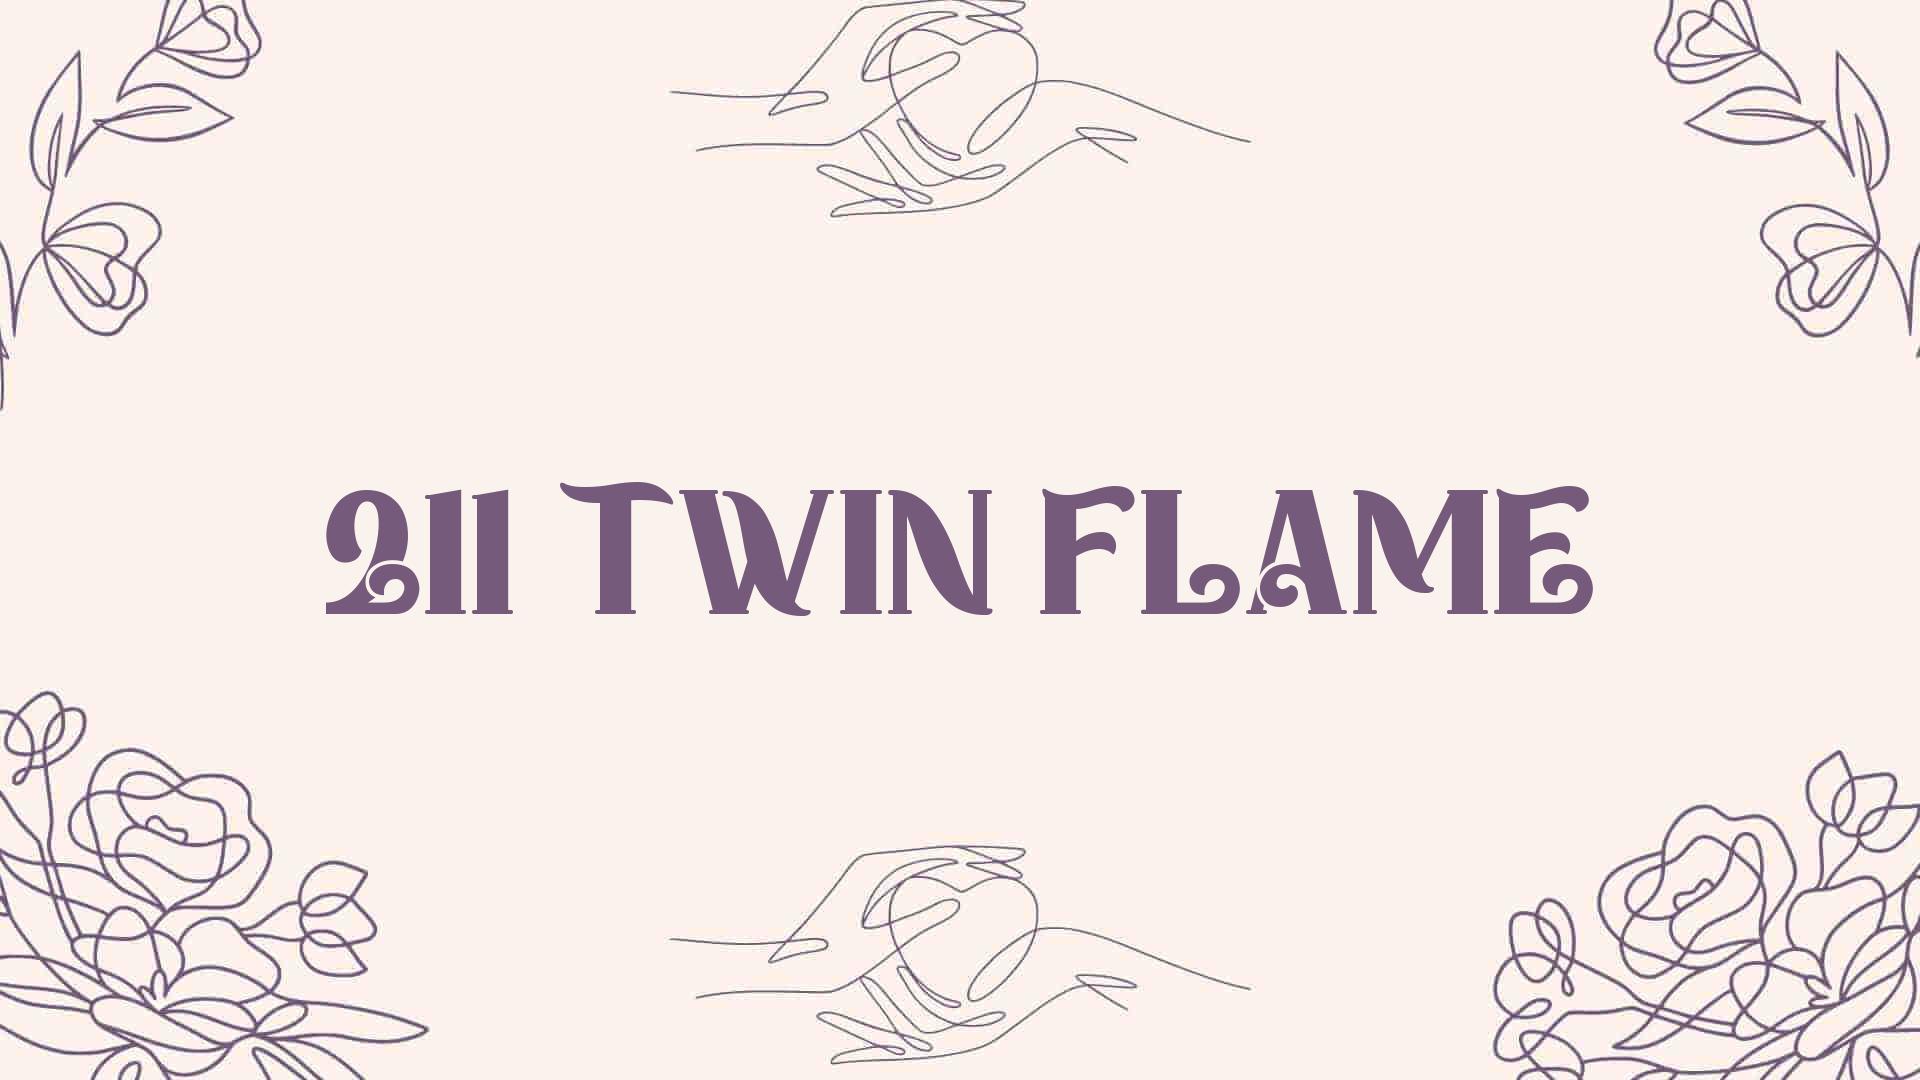 211 twin flame [ Meaning Revealed ]